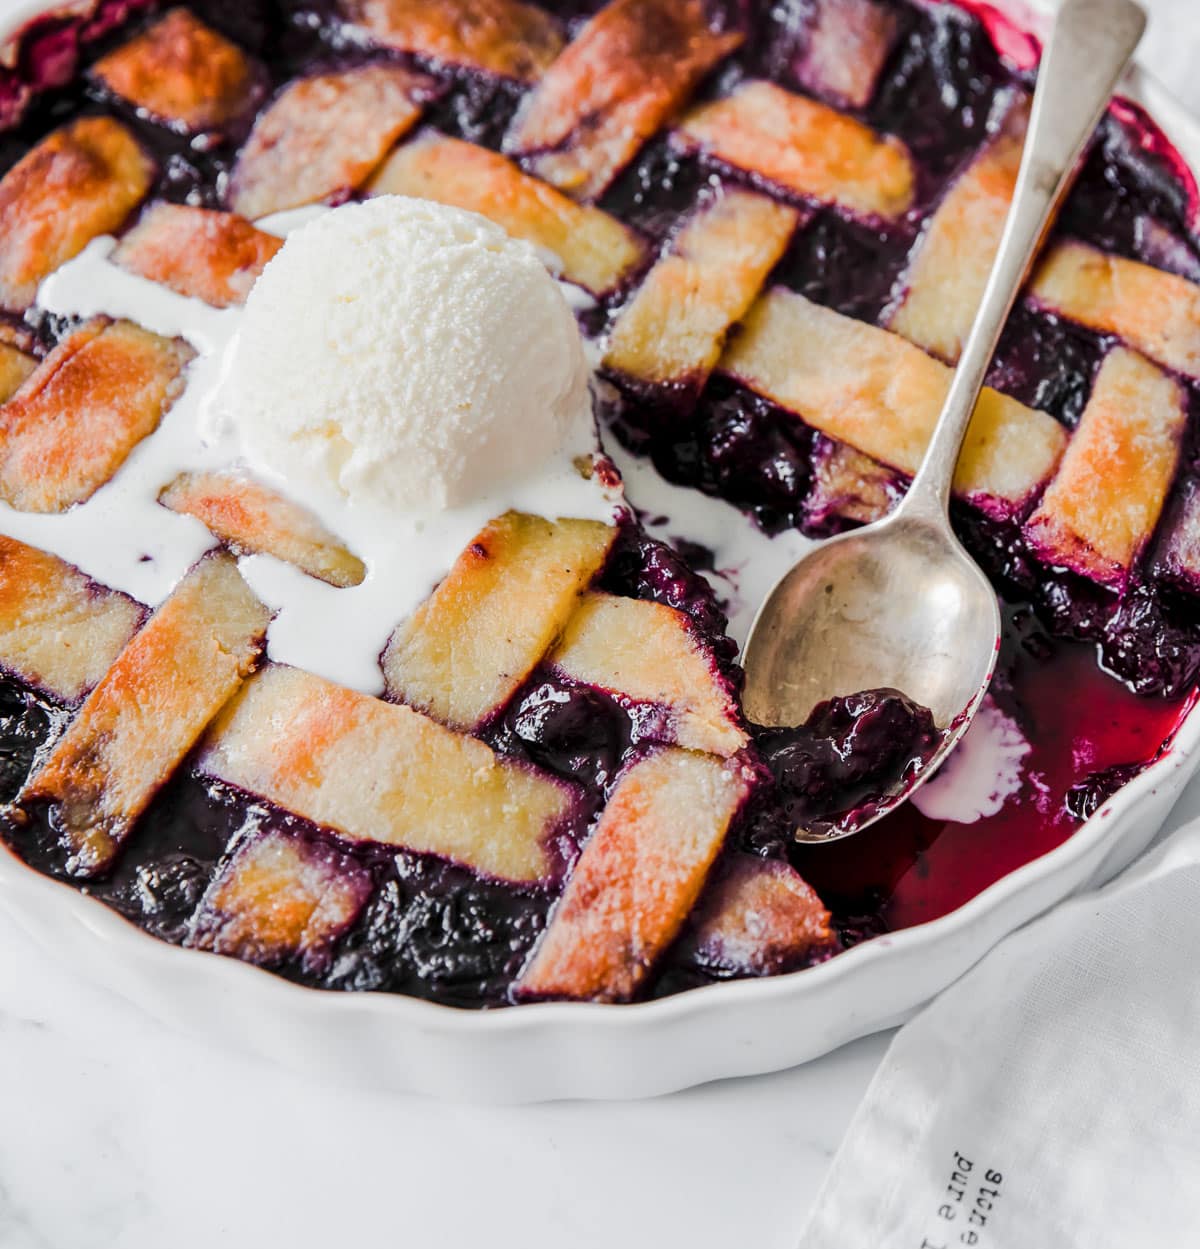 A berry pie with a lattice crust topping and a scoop of vanilla ice cream on top.